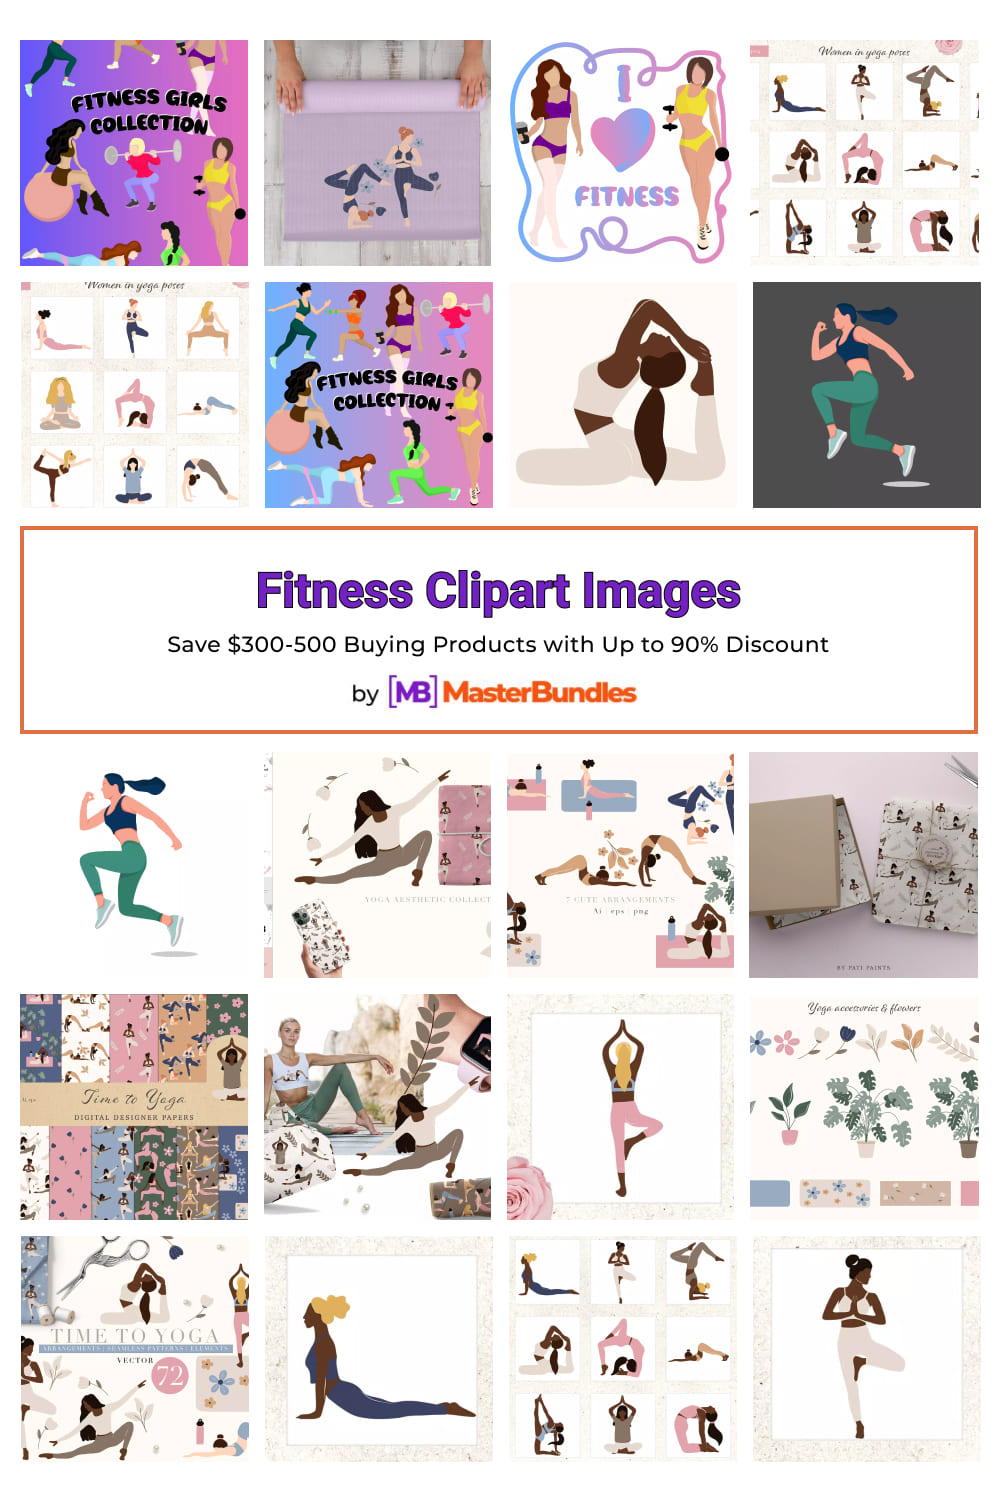 Fitness Clipart Images Pinterest image.